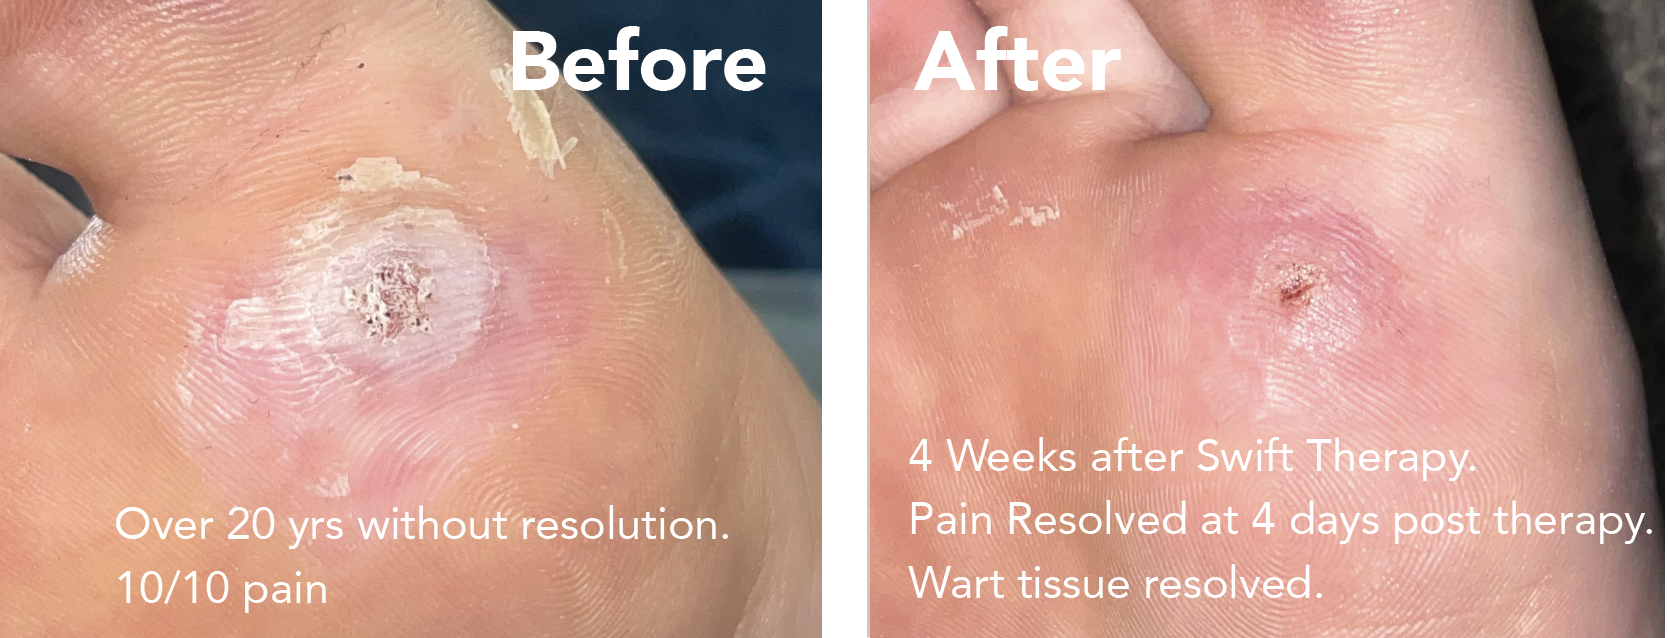 wart treatment before and after